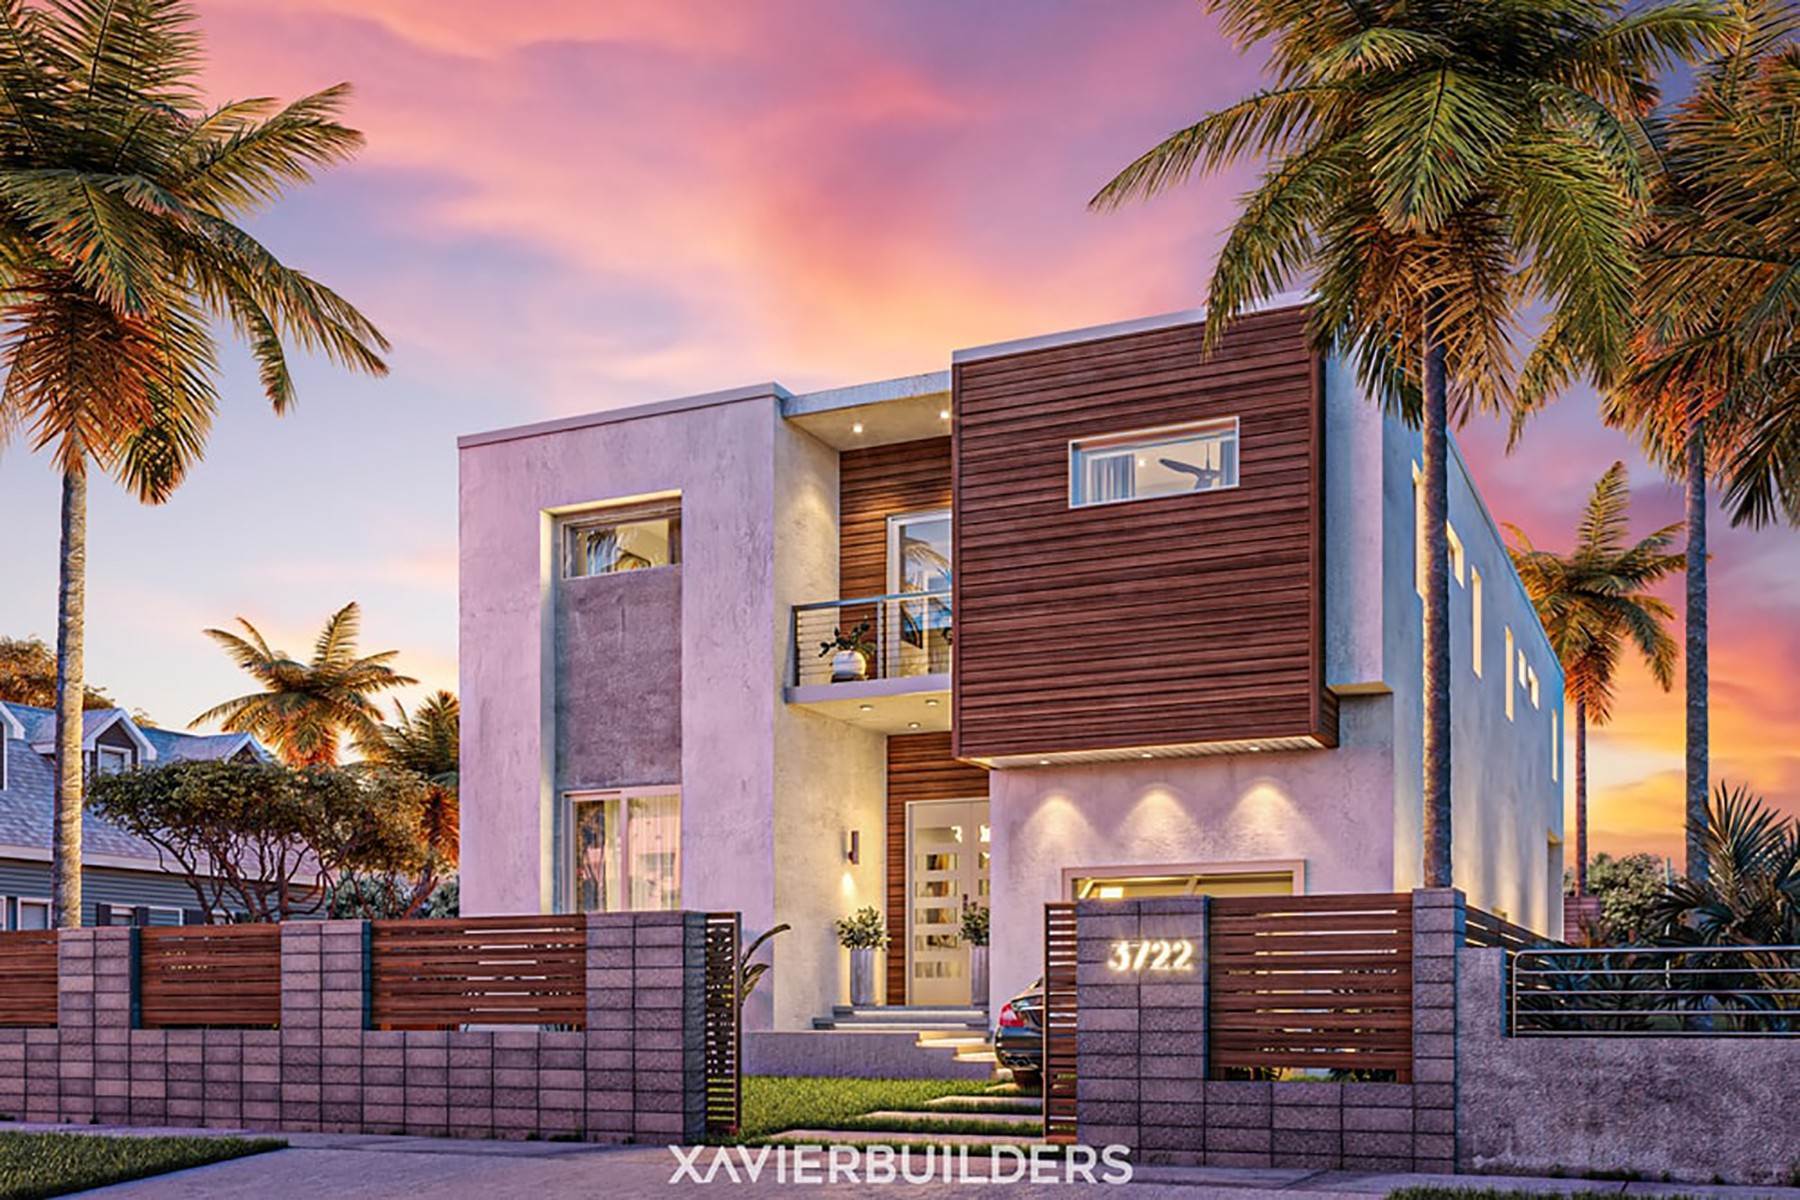 Single Family Homes for Sale at Ultra-Luxury Construction 3722 Eagle Avenue Key West, Florida 33040 United States